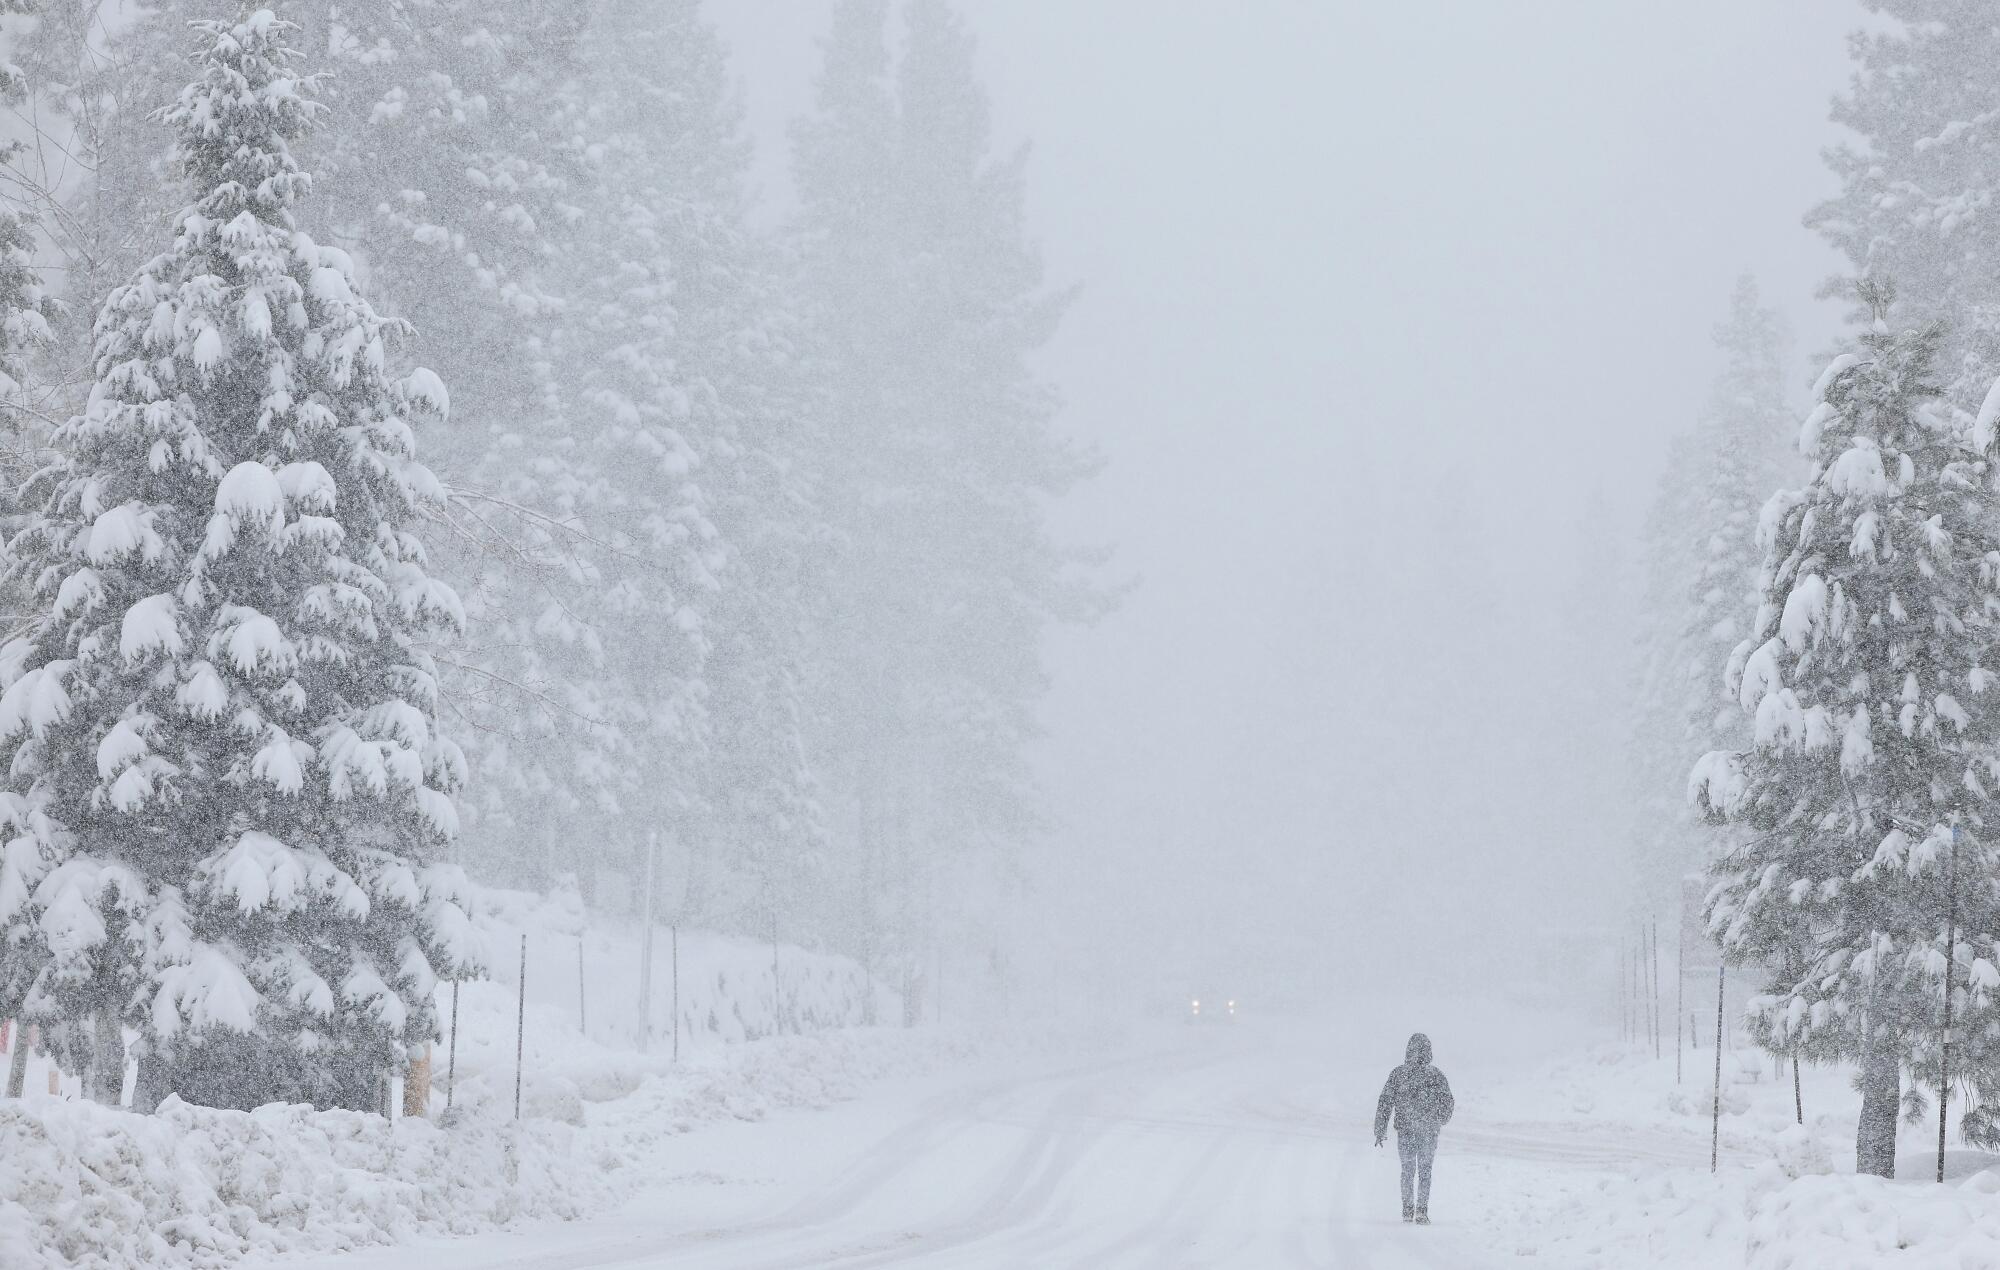 A person walks down a snow-covered road flanked by snowy pine trees as snow falls.